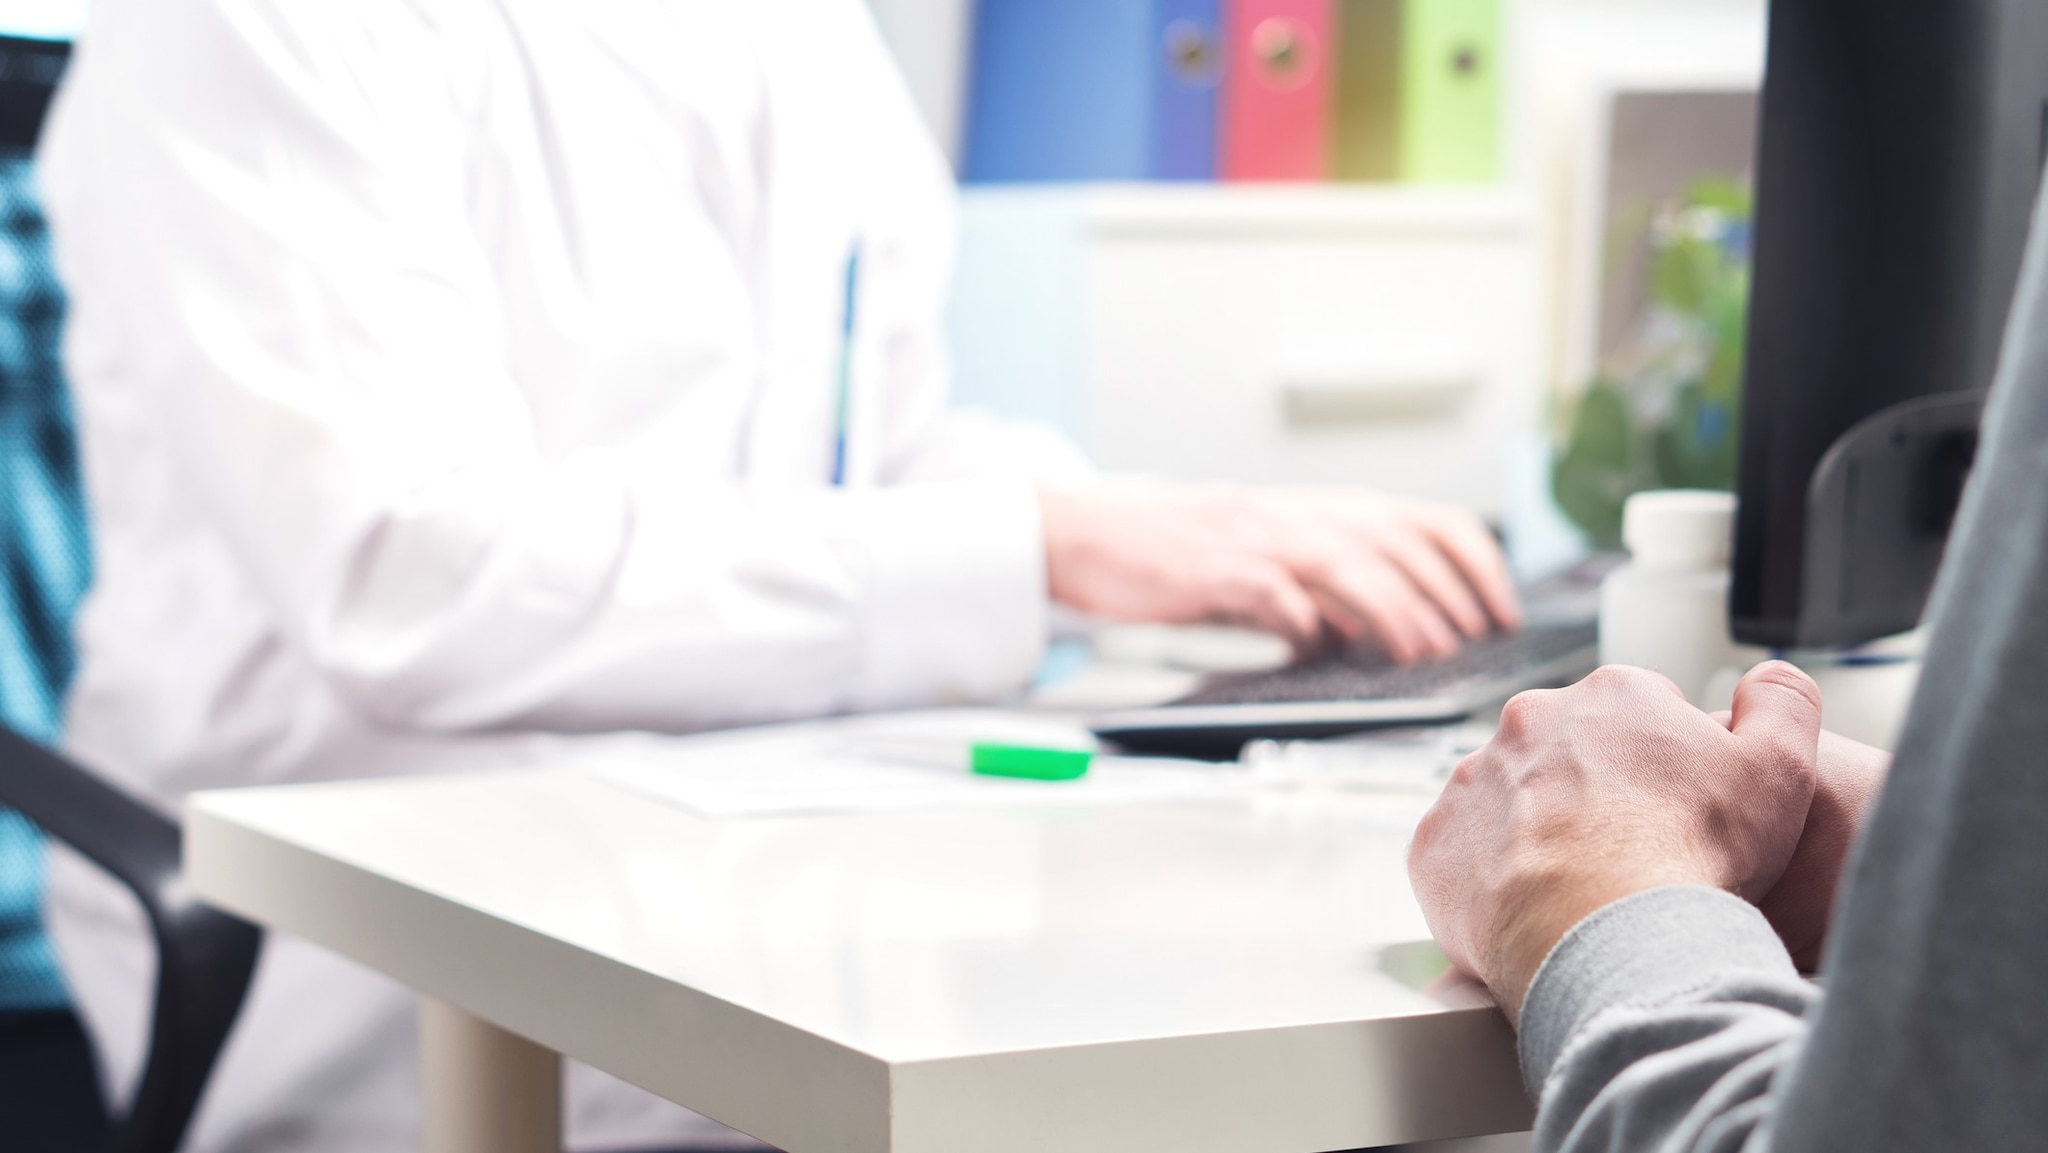 A health care professional updating an electronic health record for a patient